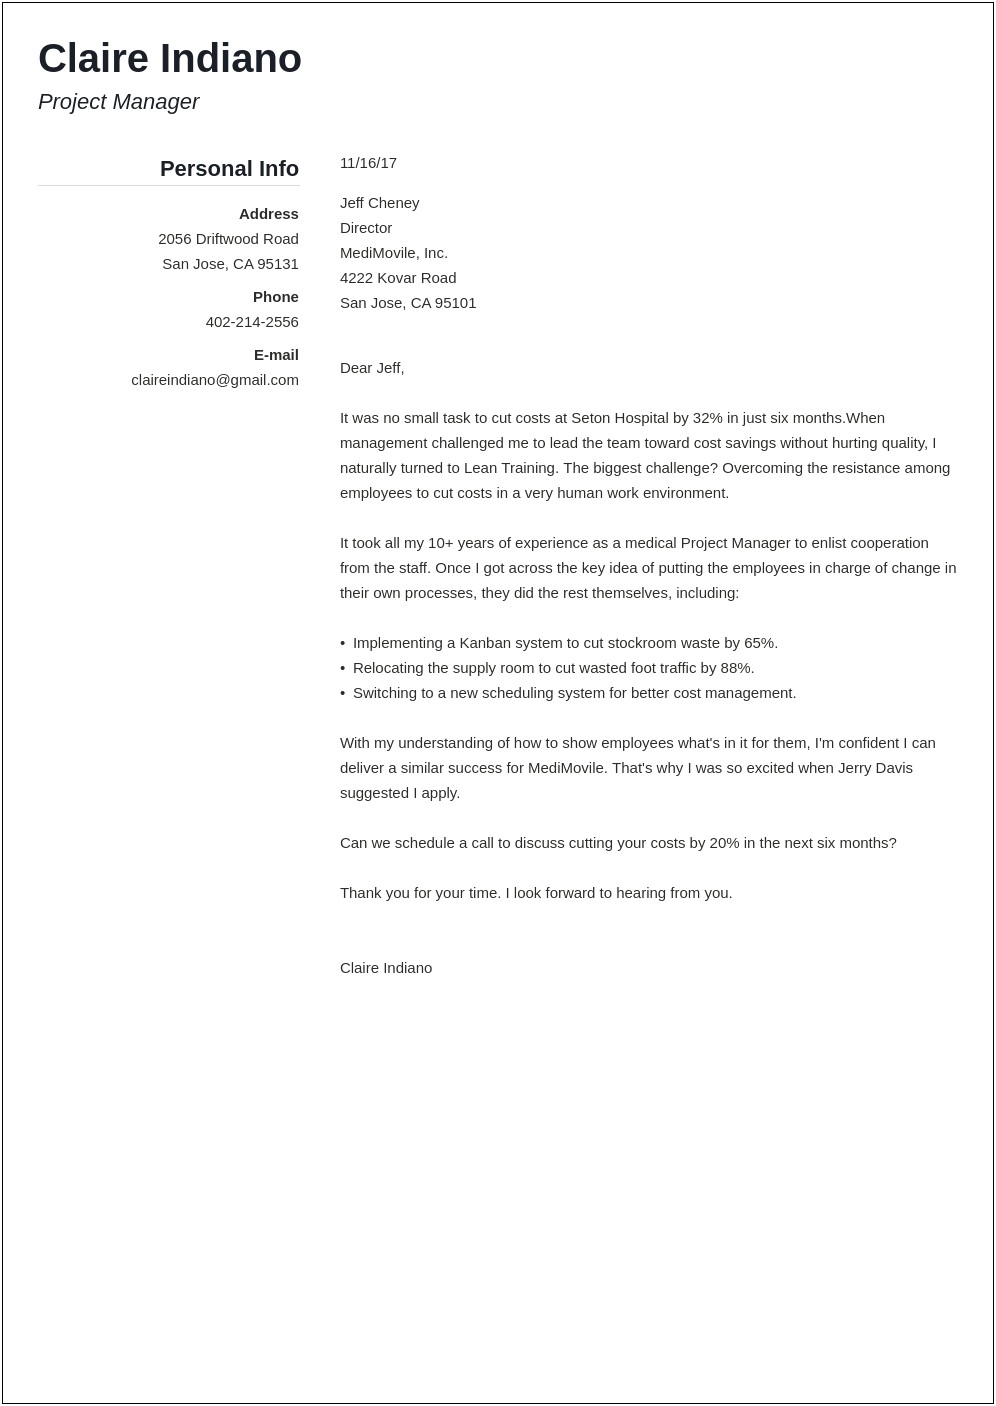 Resume And Coveer Letter Creation Blogs